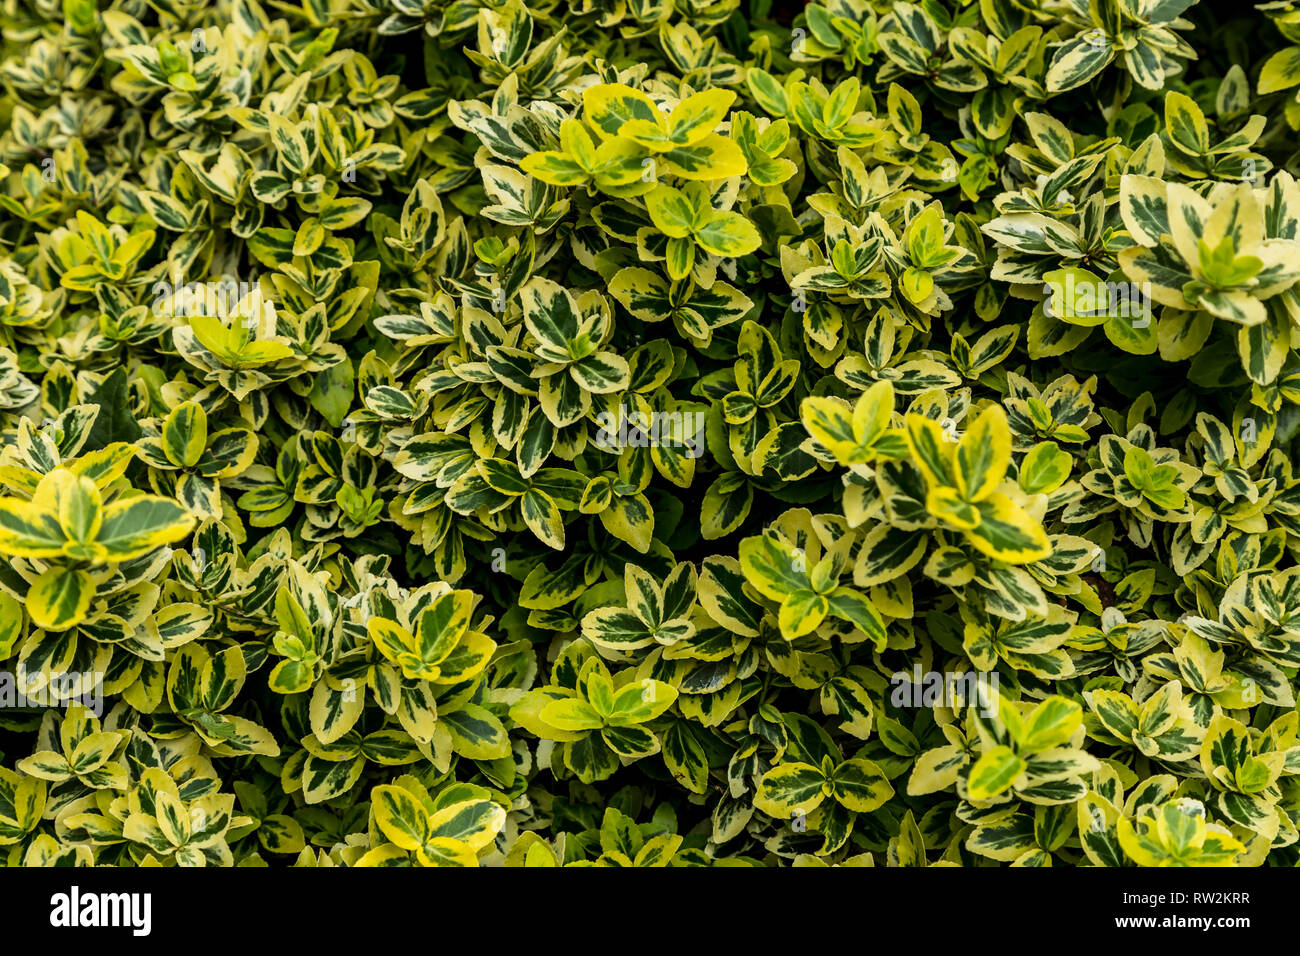 Japanese Spindle Tree Or Shrub High Resolution Stock Photography And Images Alamy